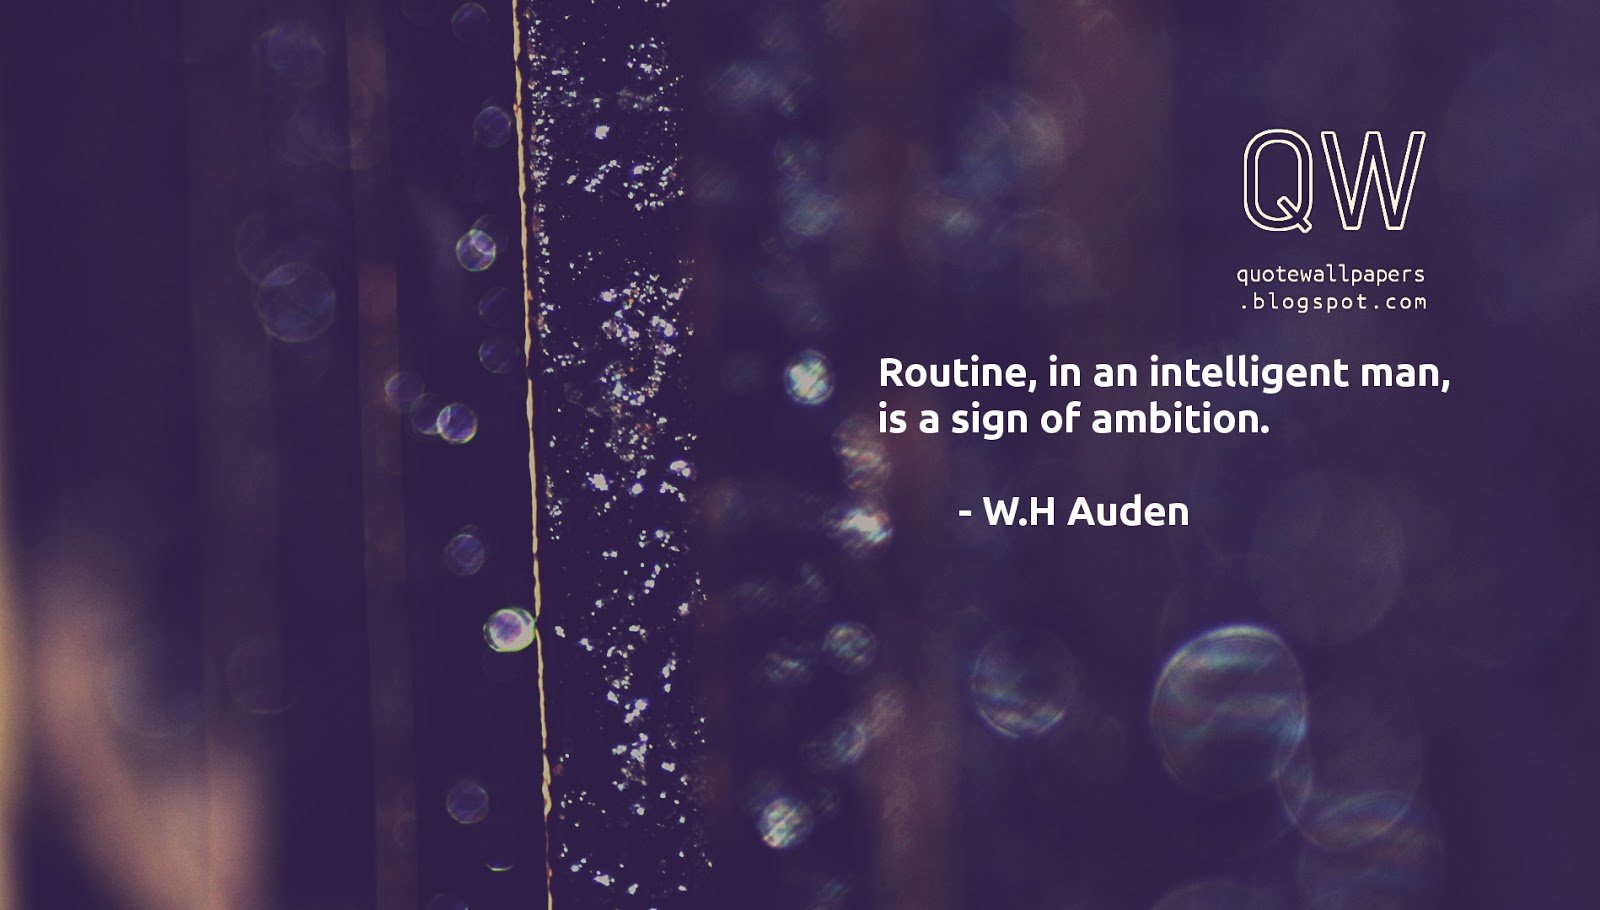 Routine, in an intelligent man, is a sign of ambition